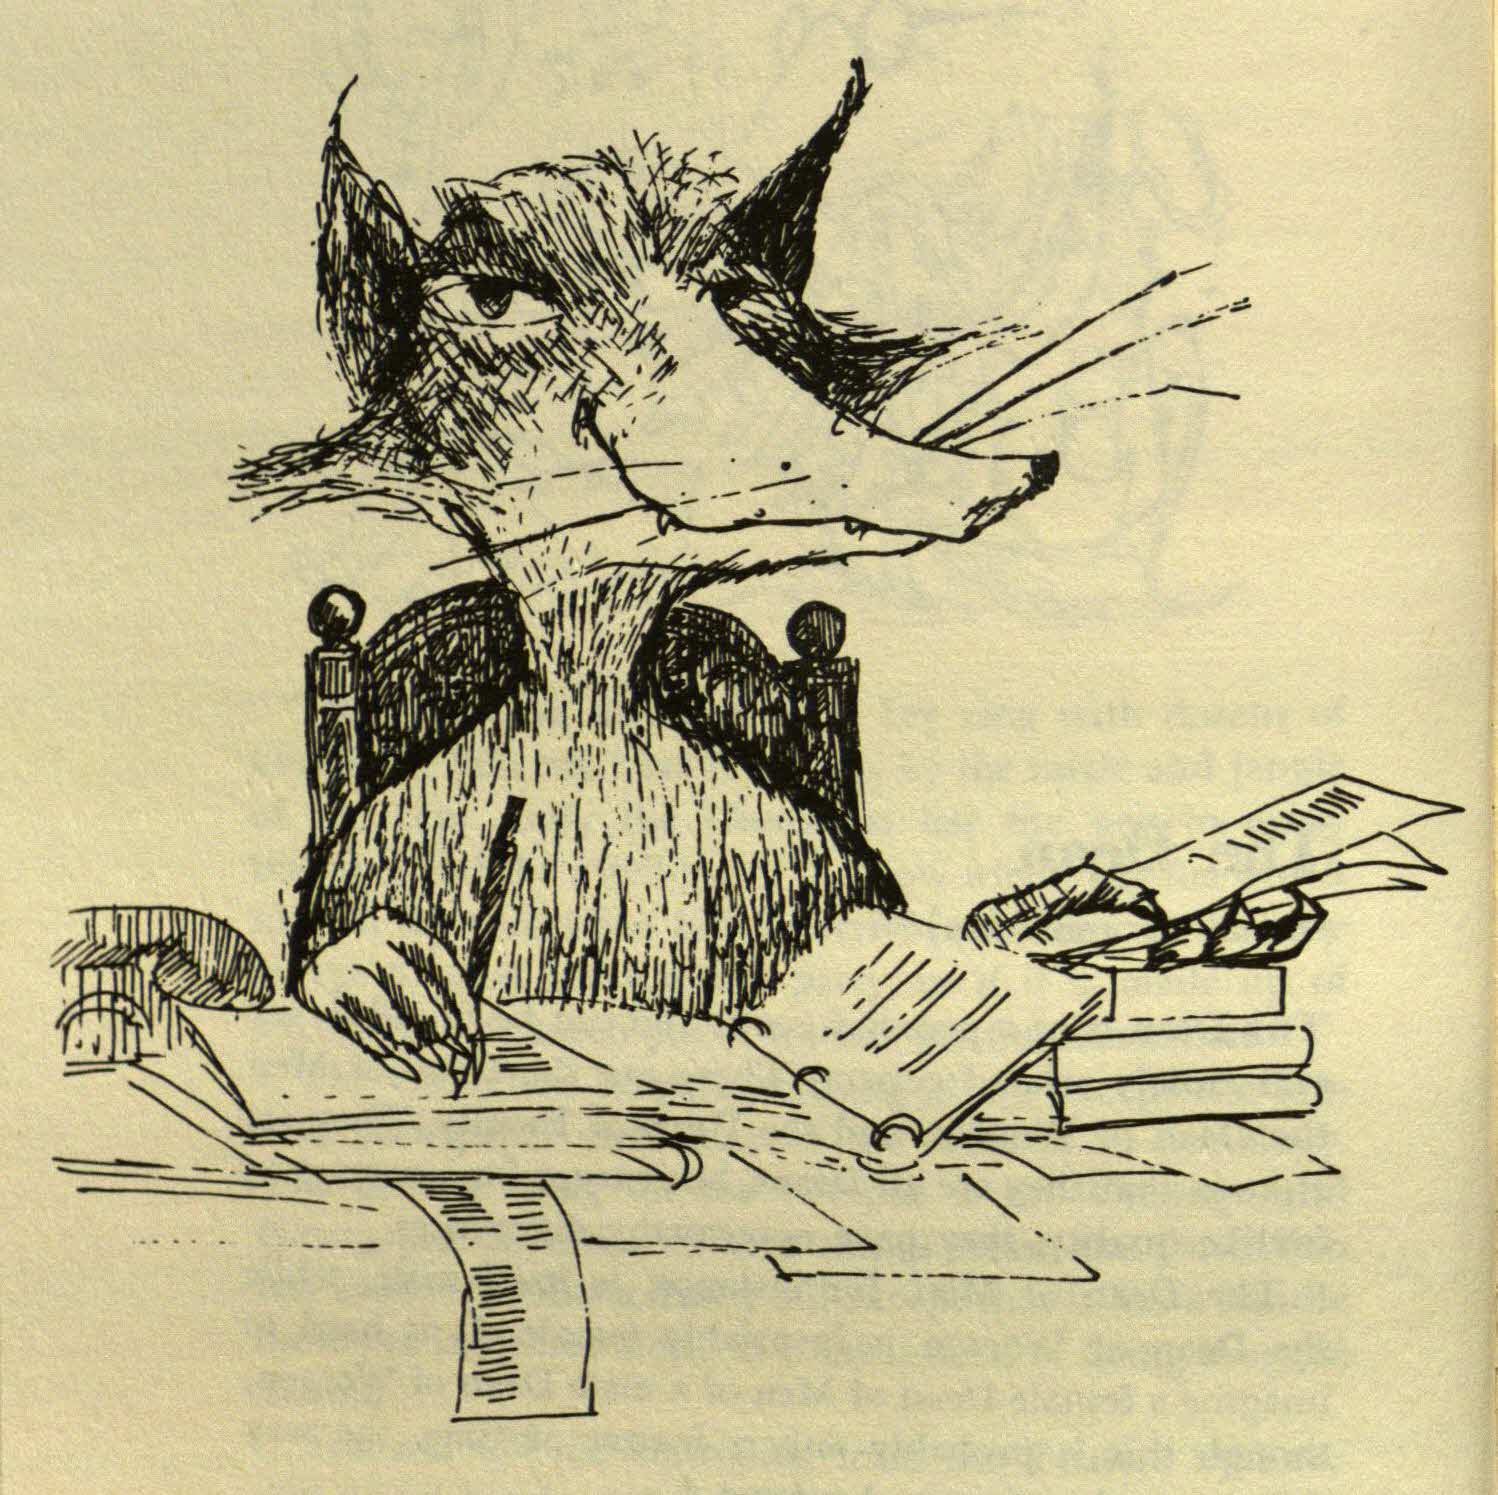 New series: Fantastic Beasts of Special Collections – Library News